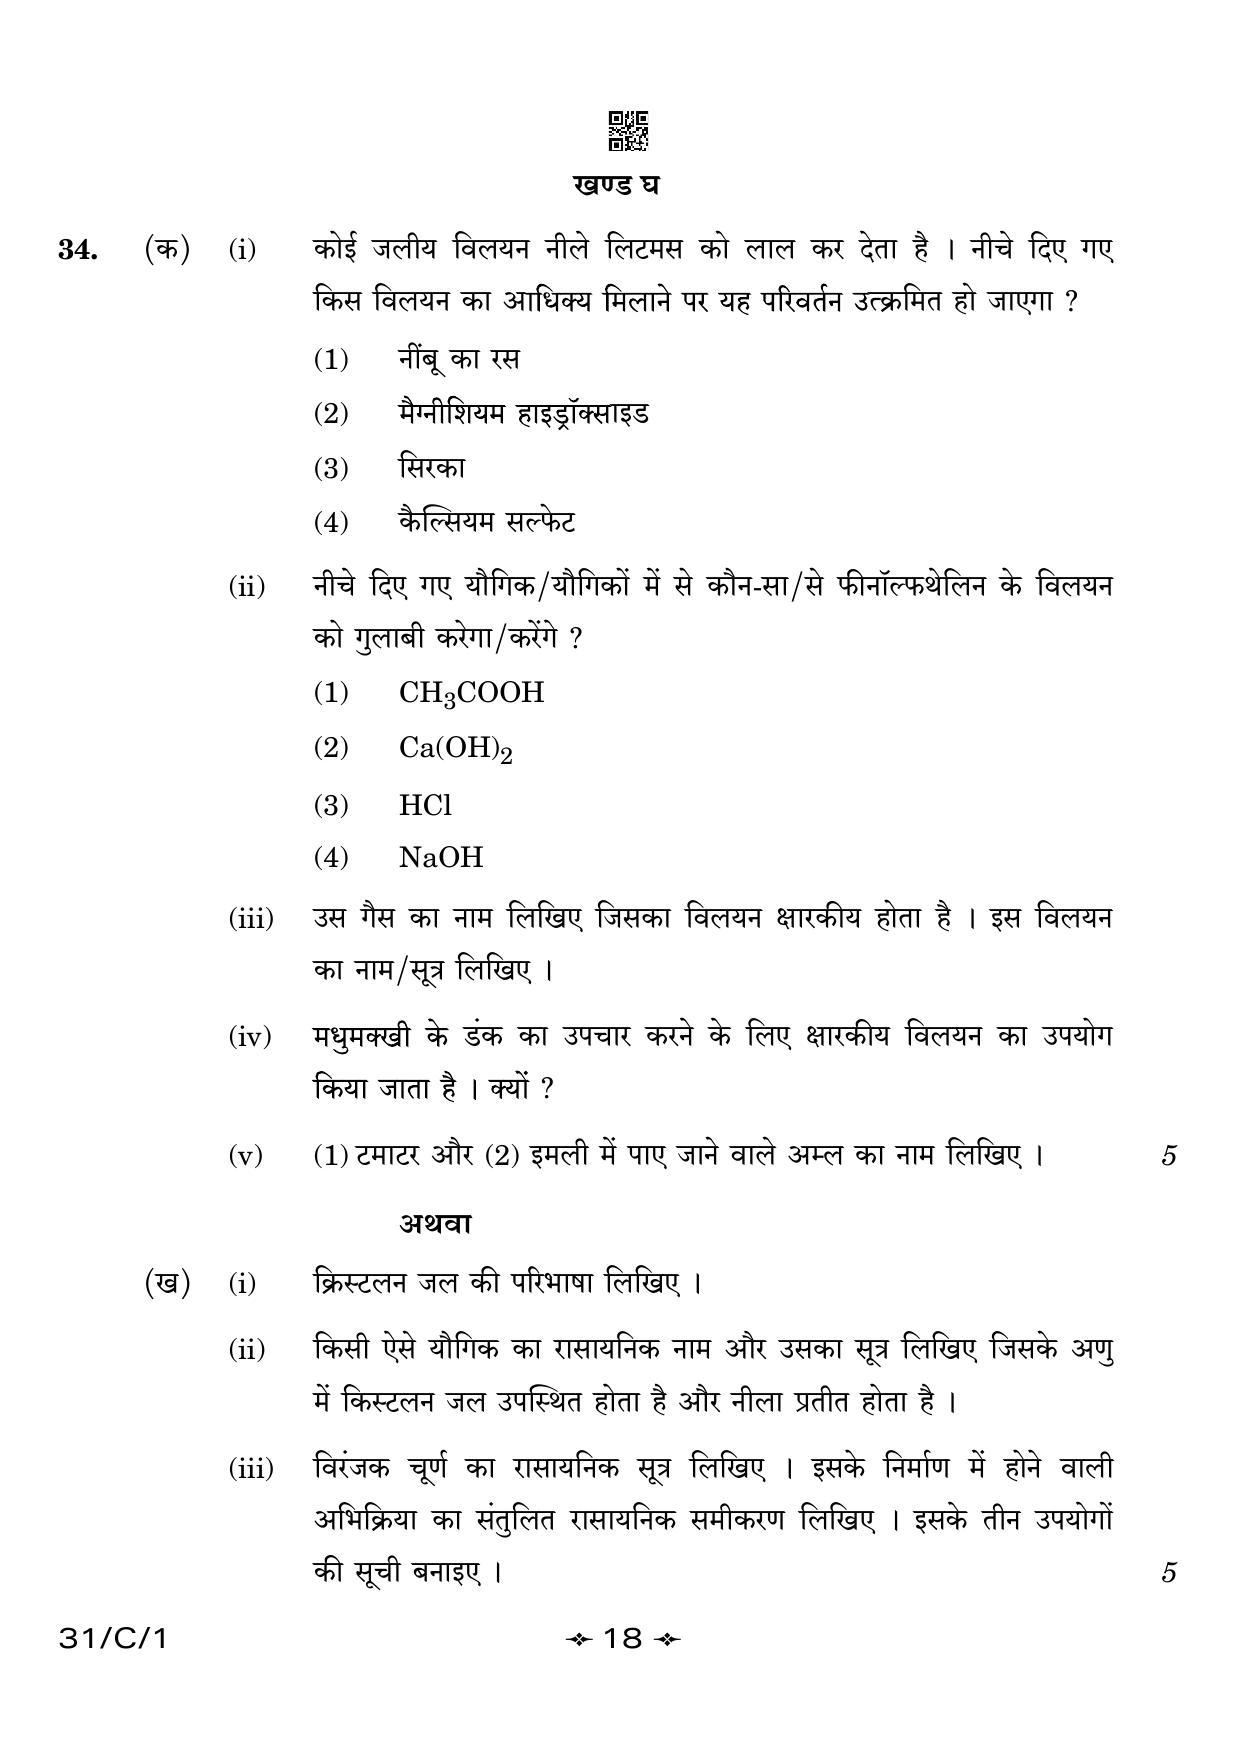 CBSE Class 10 31-1 Science 2023 (Compartment) Question Paper - Page 18